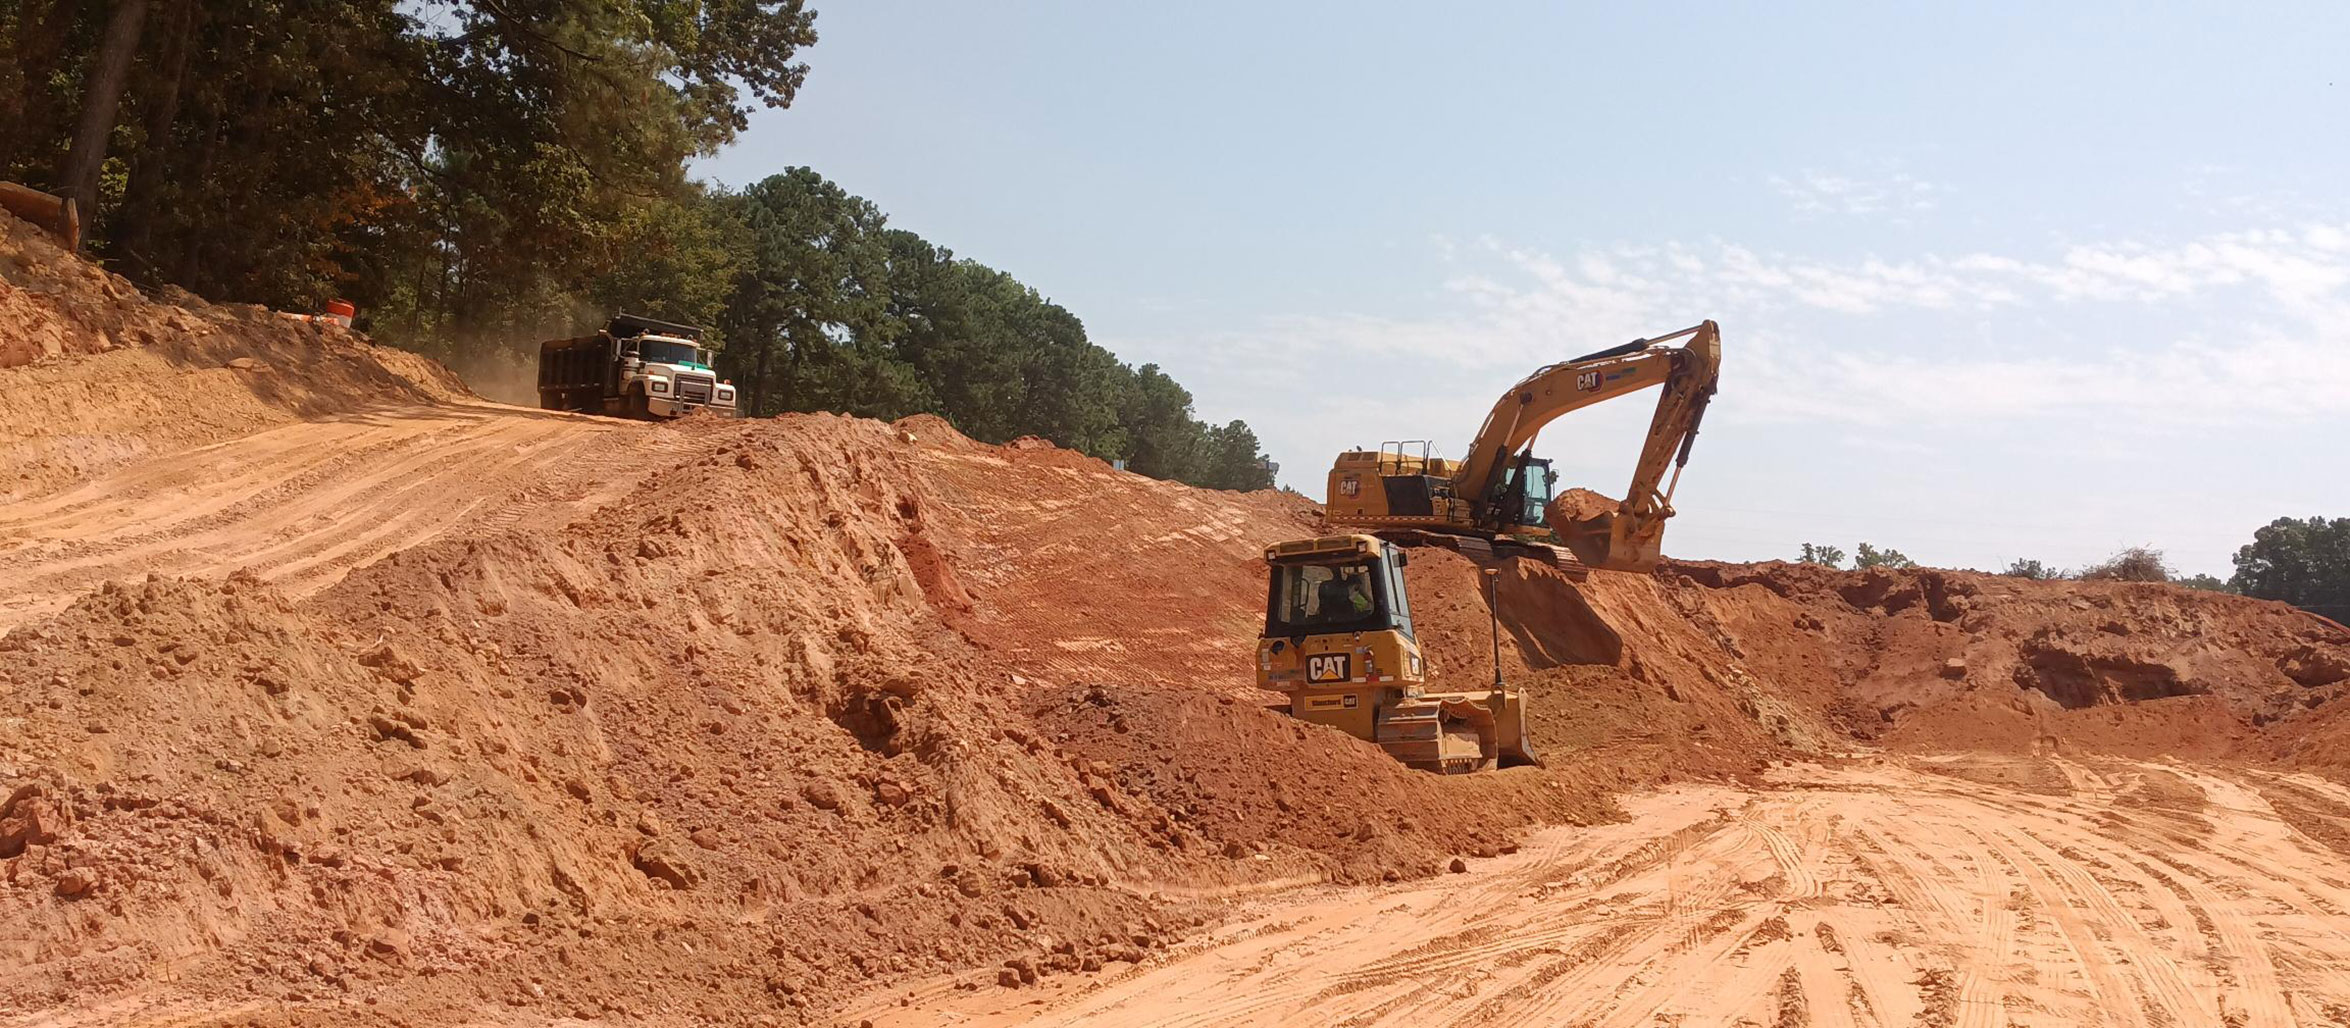 The grade of the future lanes is lowered by excavating the soil.  Excavated material is hauled to areas of the project that need embankments to raise the grade.  This is called balancing of the earthwork materials.